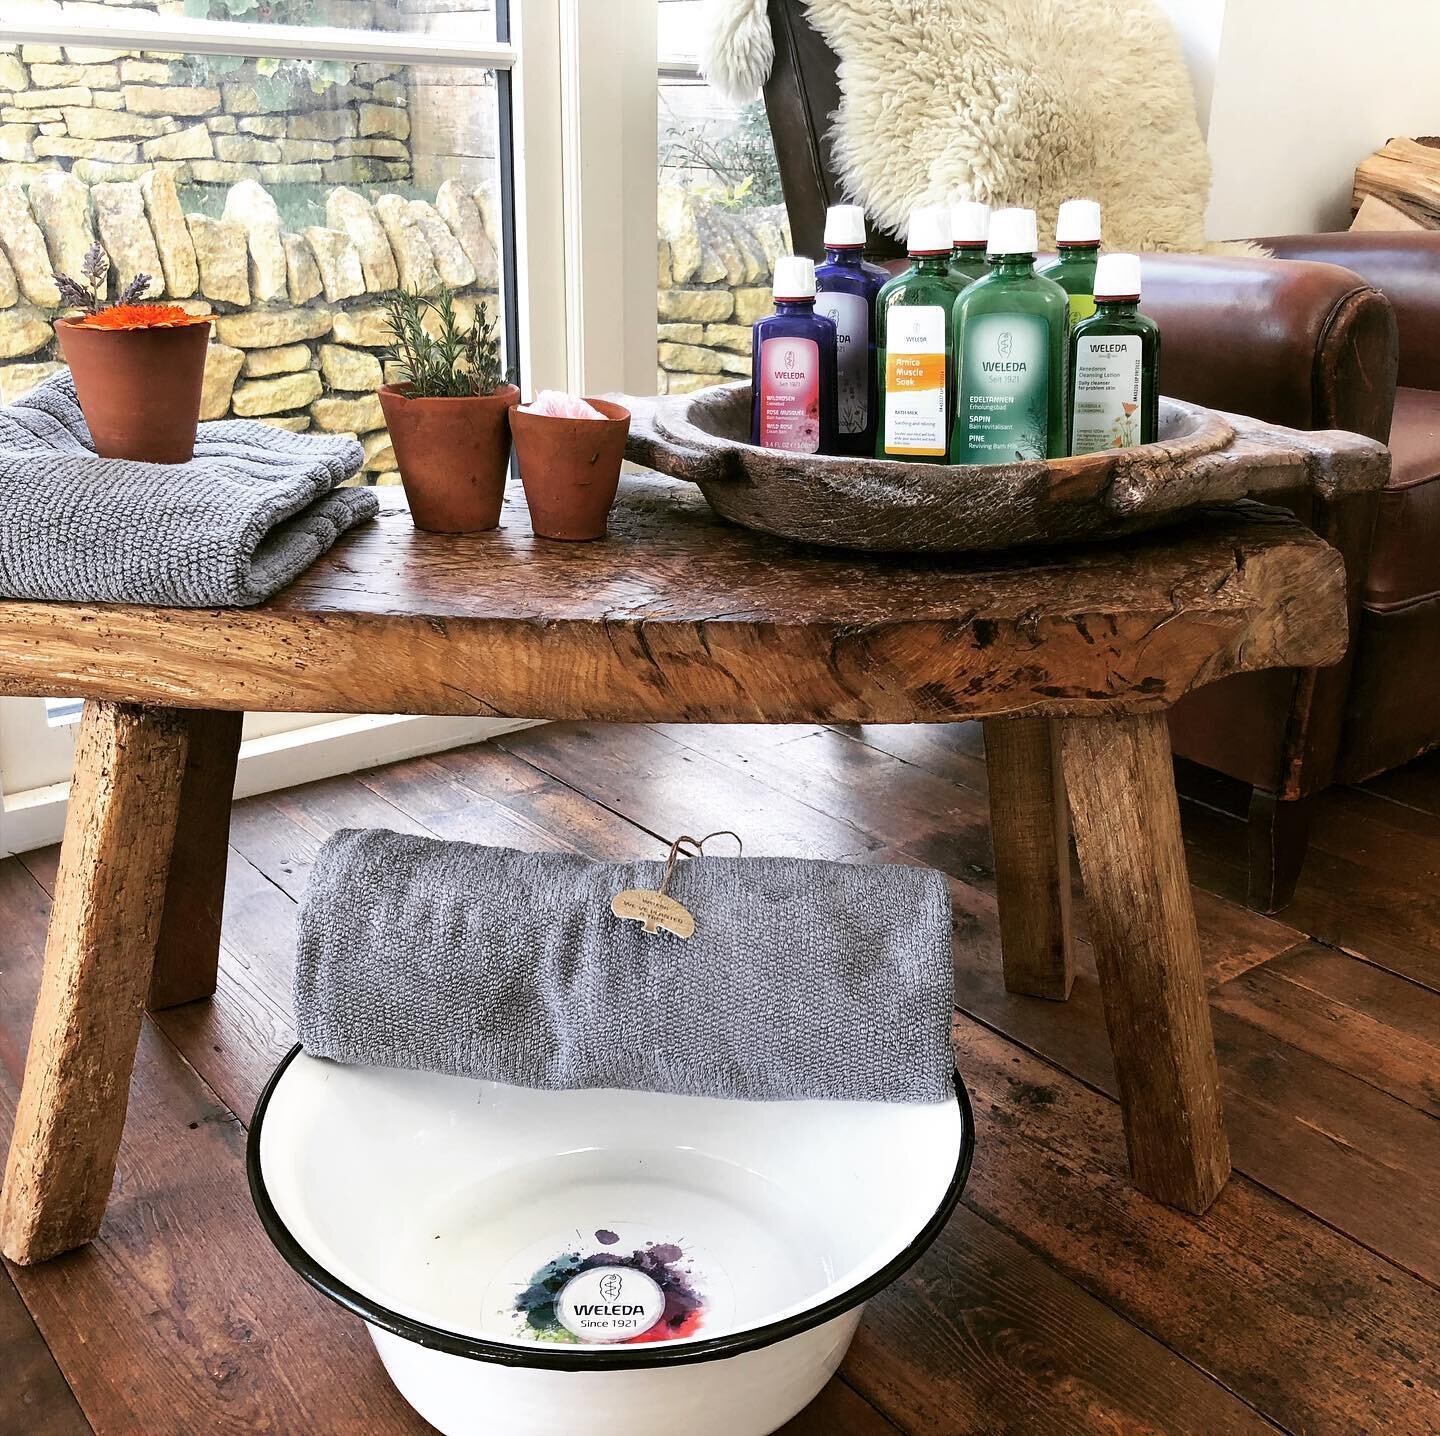 World Kindness Day setting up for my Yoga and Weleda Footbath event in just under an hour - today Plant a Forest with Weleda and Treesisters #donateTreesisters#  #Weledabathmilks#wellness#bekindtoyourself#www.weleda-advisor.co.uk/shop/AmandaBucher Do